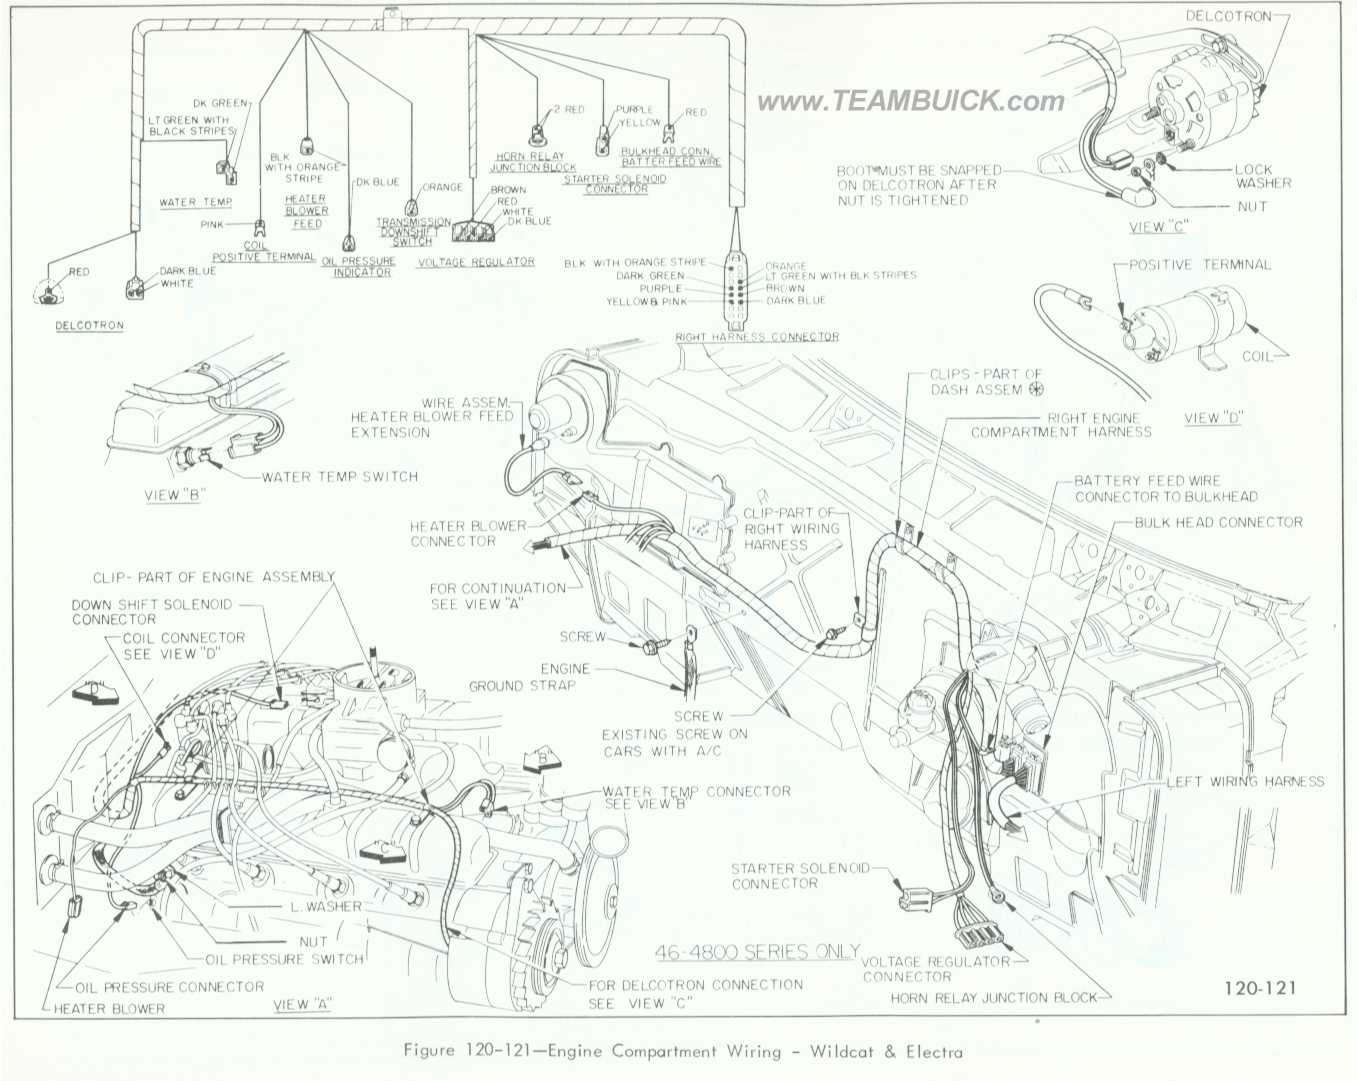 1966 Buick Wildcat, Electra, Engine Compartment Wiring